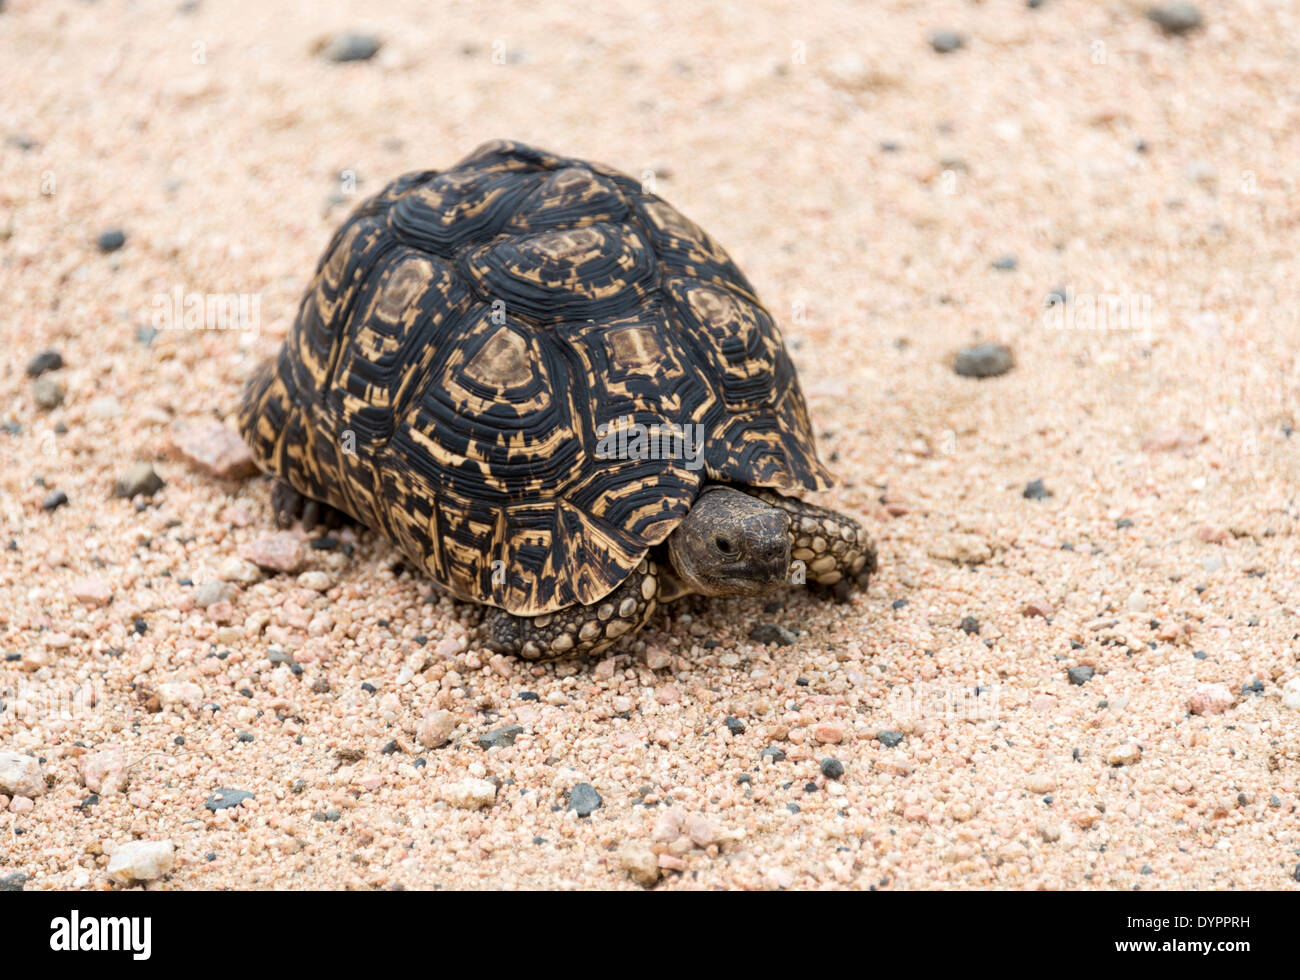 A Tortoise Land Turtle crossing the road in the Kruger Park, South Africa Stock Photo